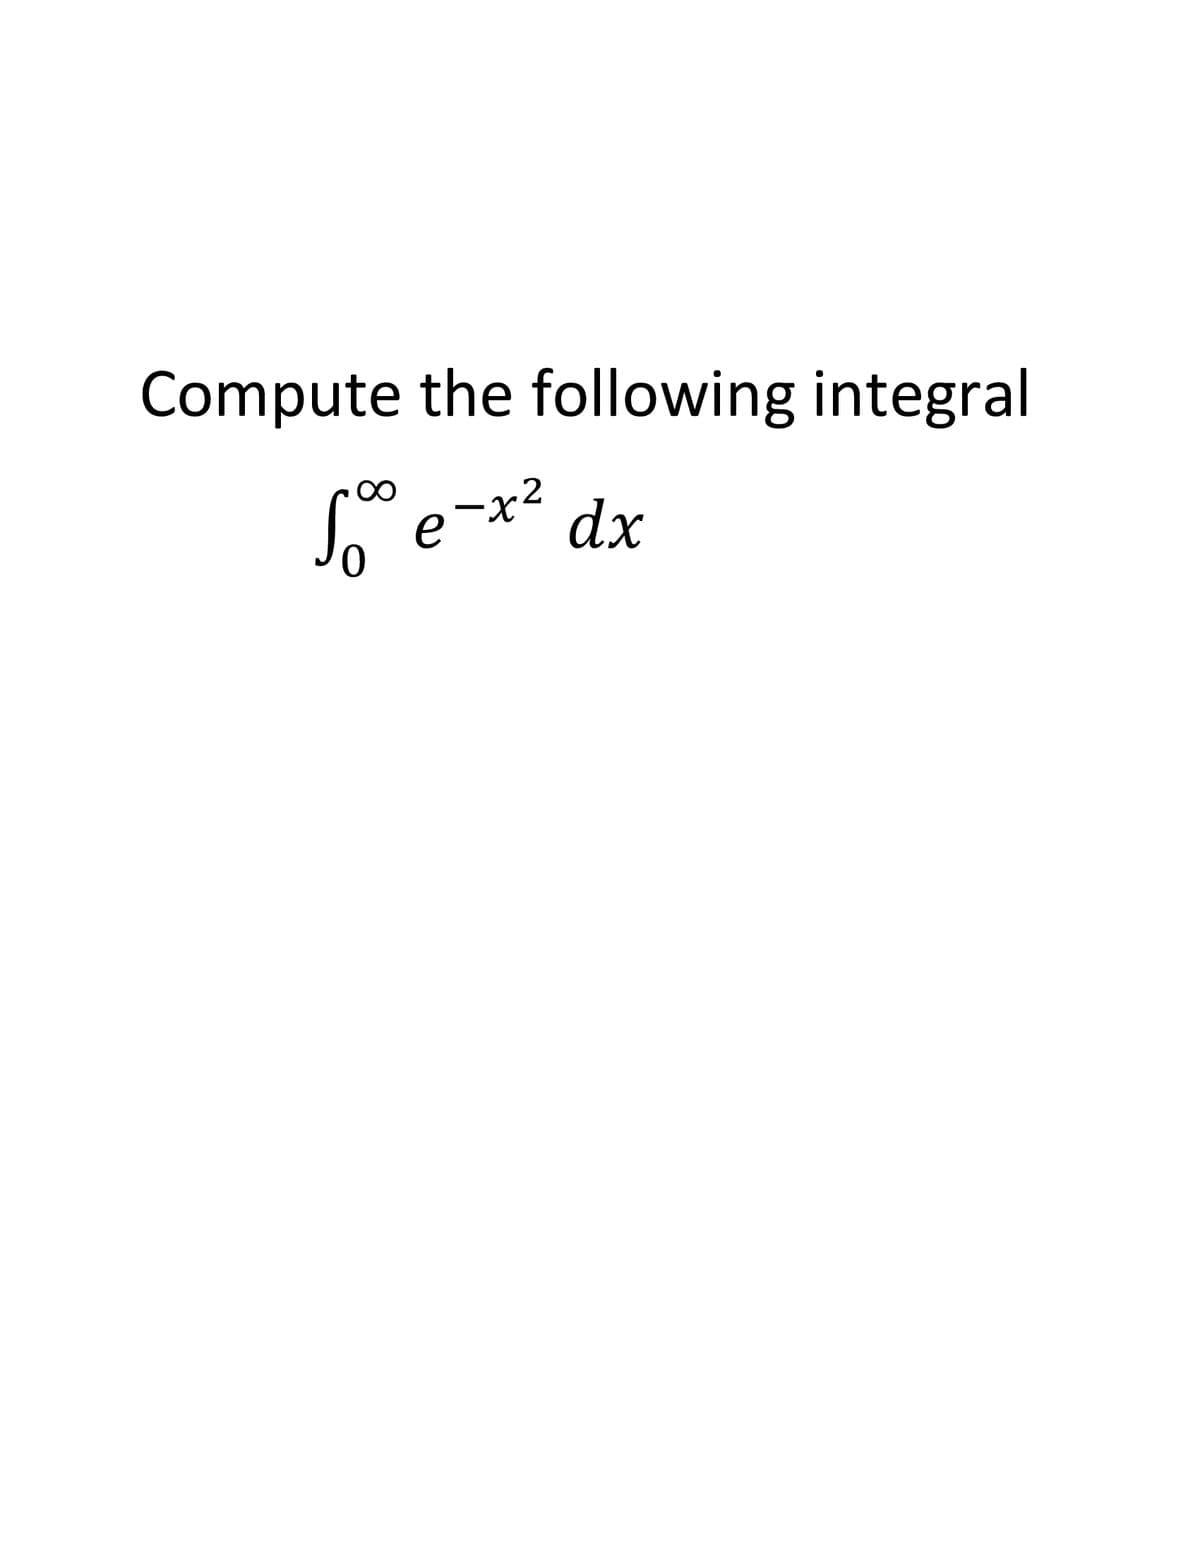 Compute the following integral
2
X.
dx
00
